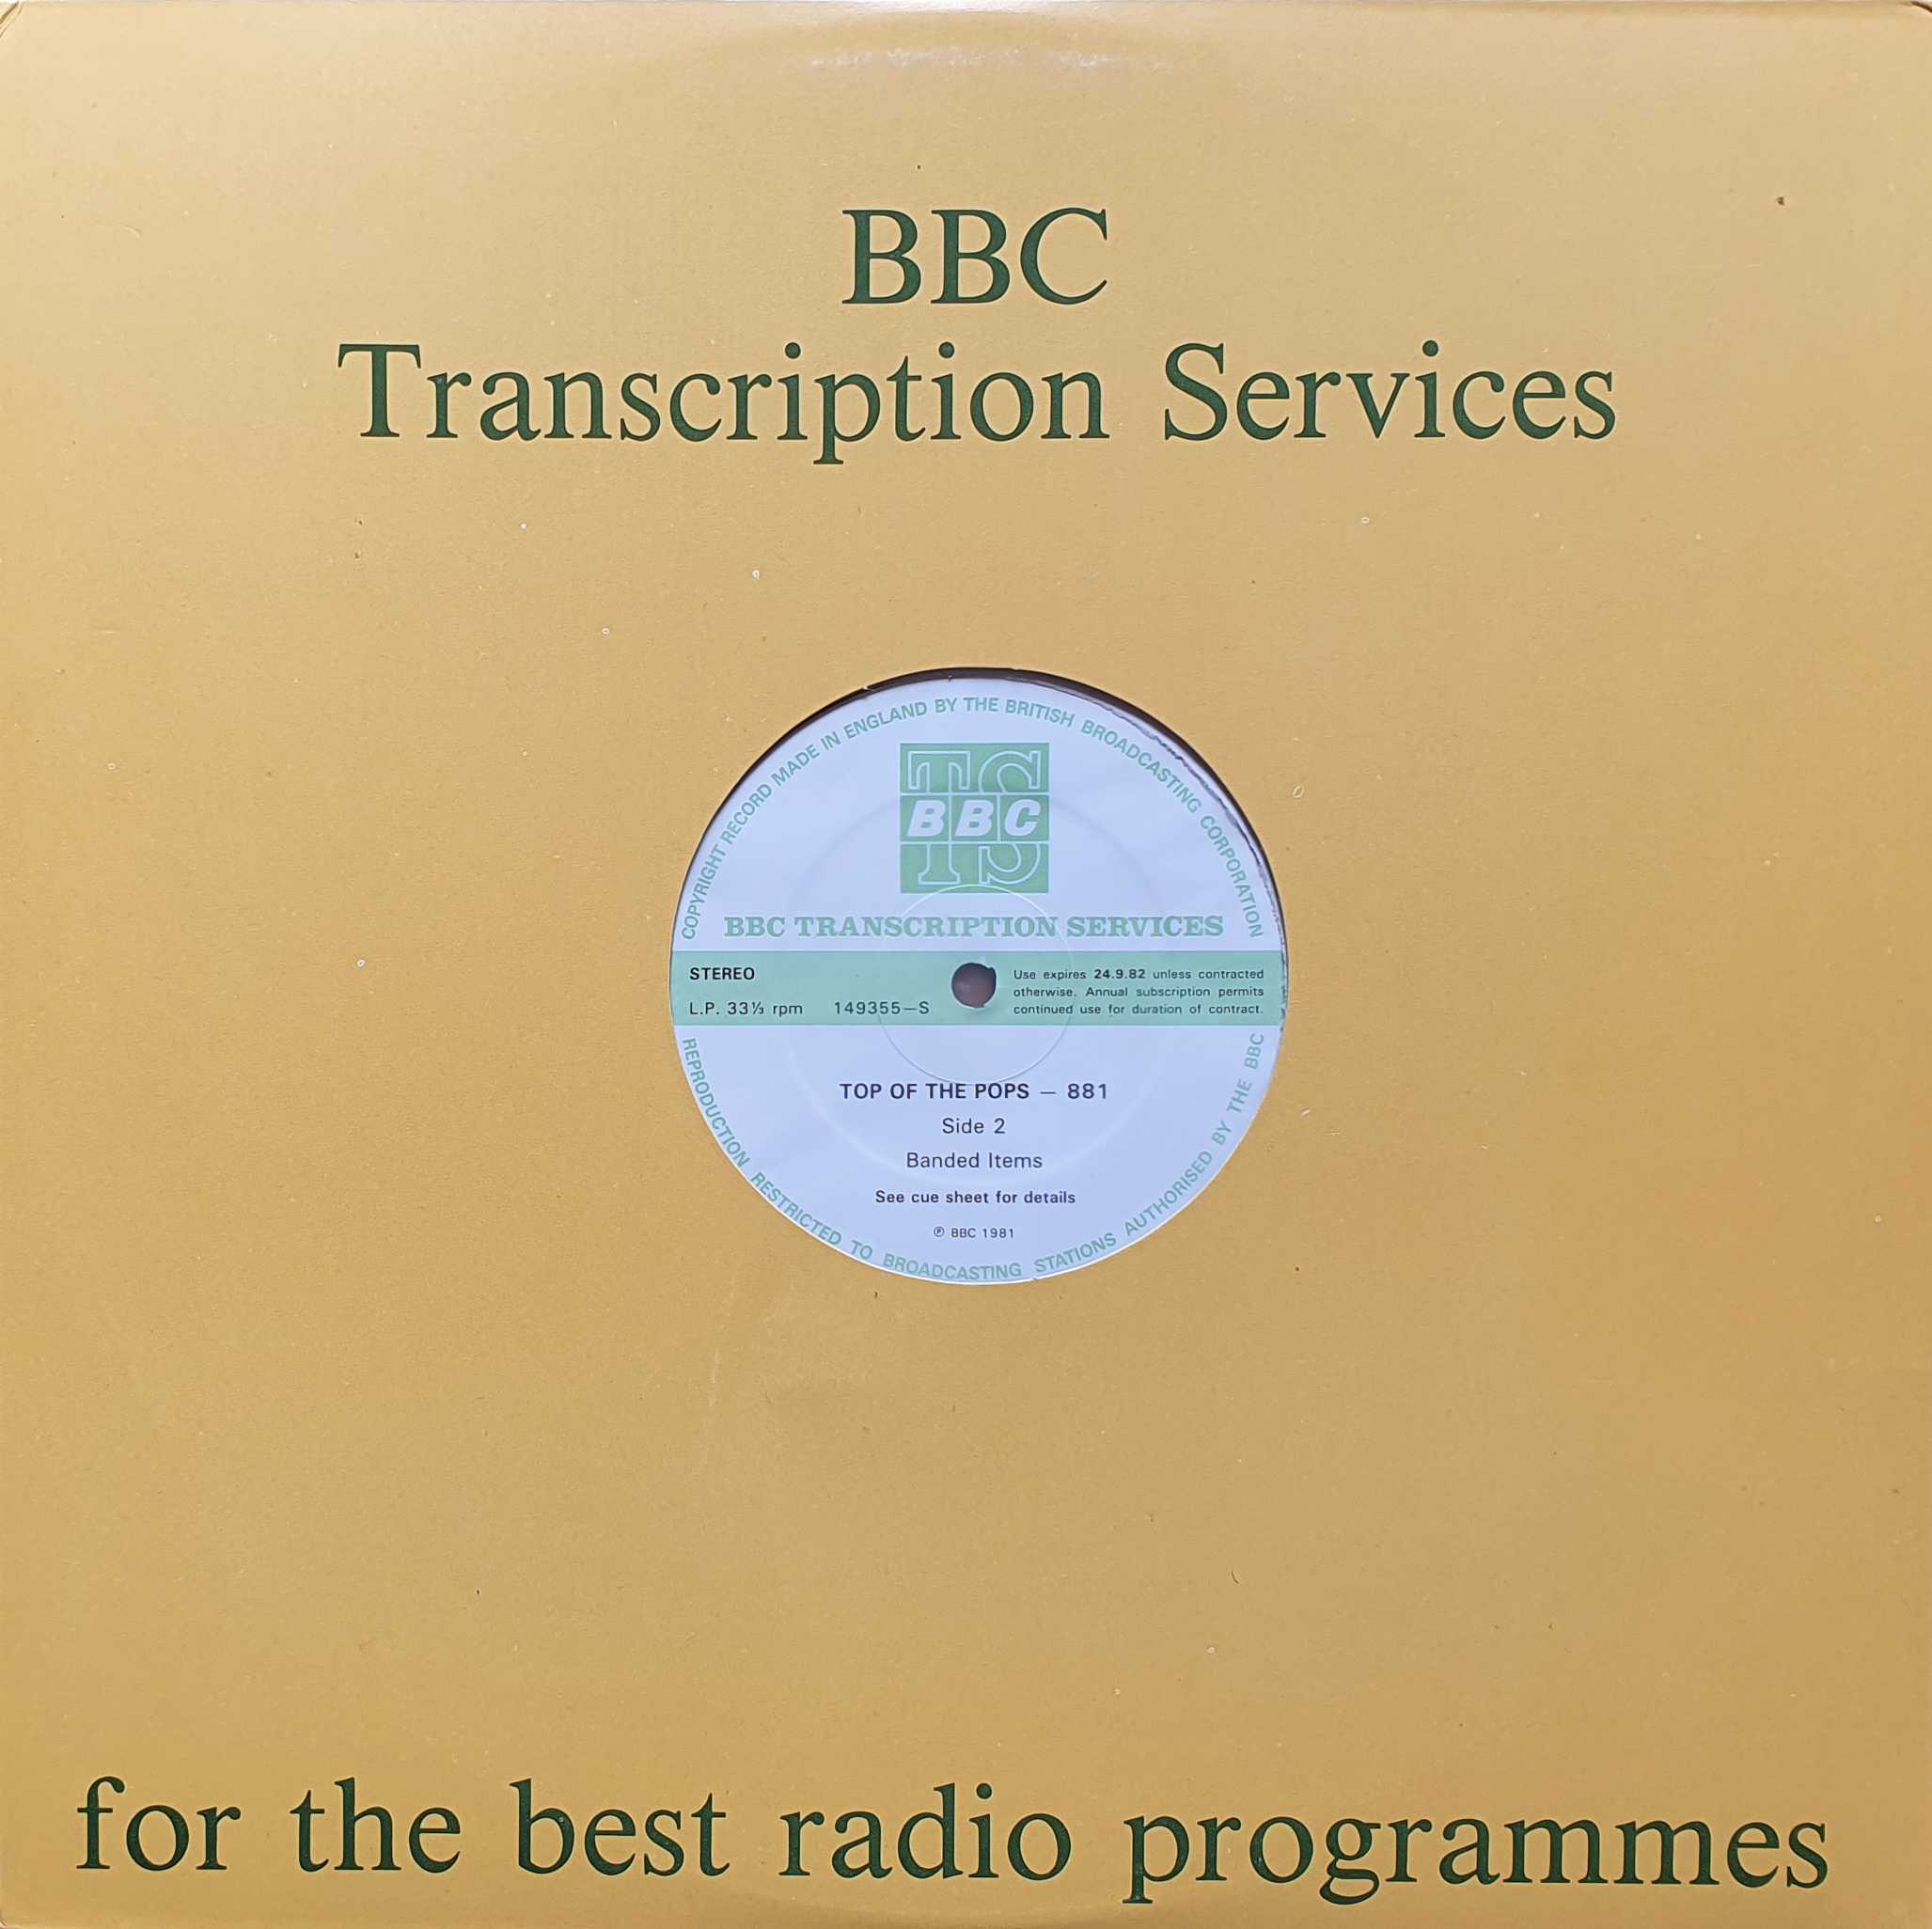 Picture of 149354 - S Top of the pops - 881 by artist Various from the BBC records and Tapes library